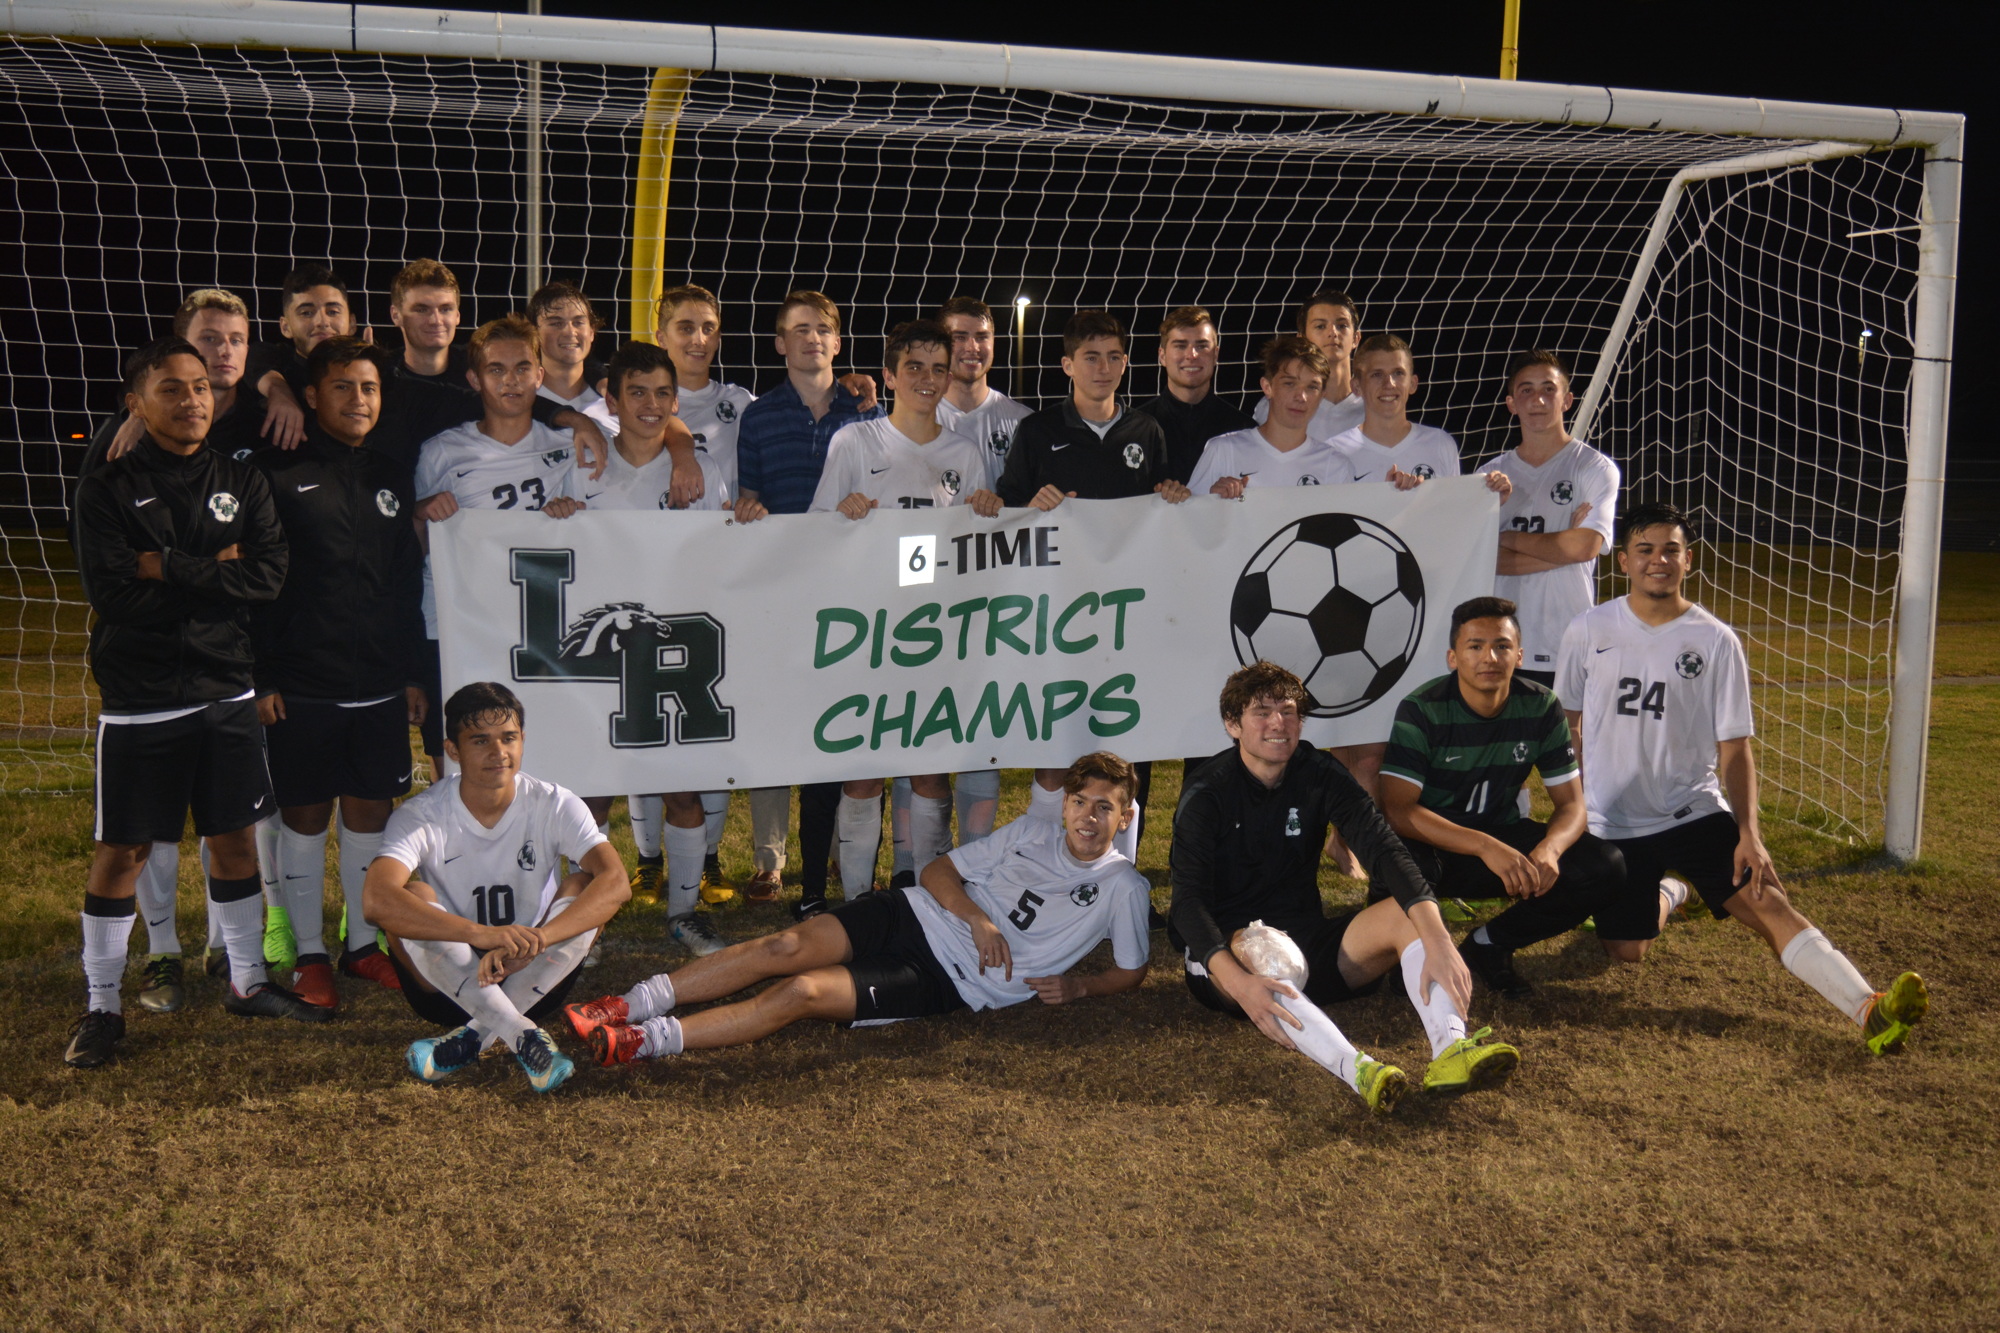 9. The Lakewood Ranch boys soccer team won its sixth-straight district title in 2018.